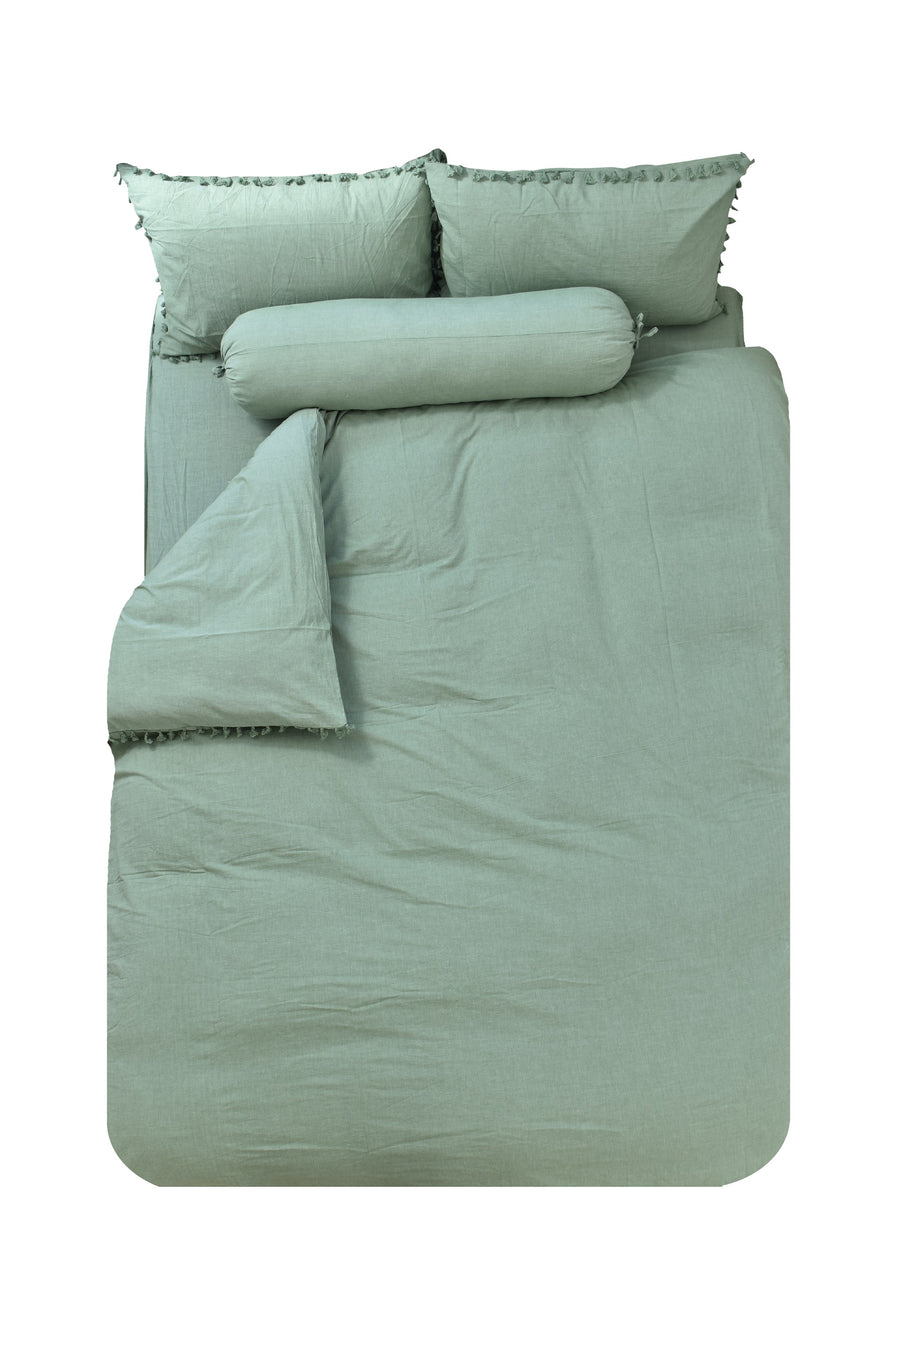 Caly Q 5-pc Quilt Cover Set (Spring Green)